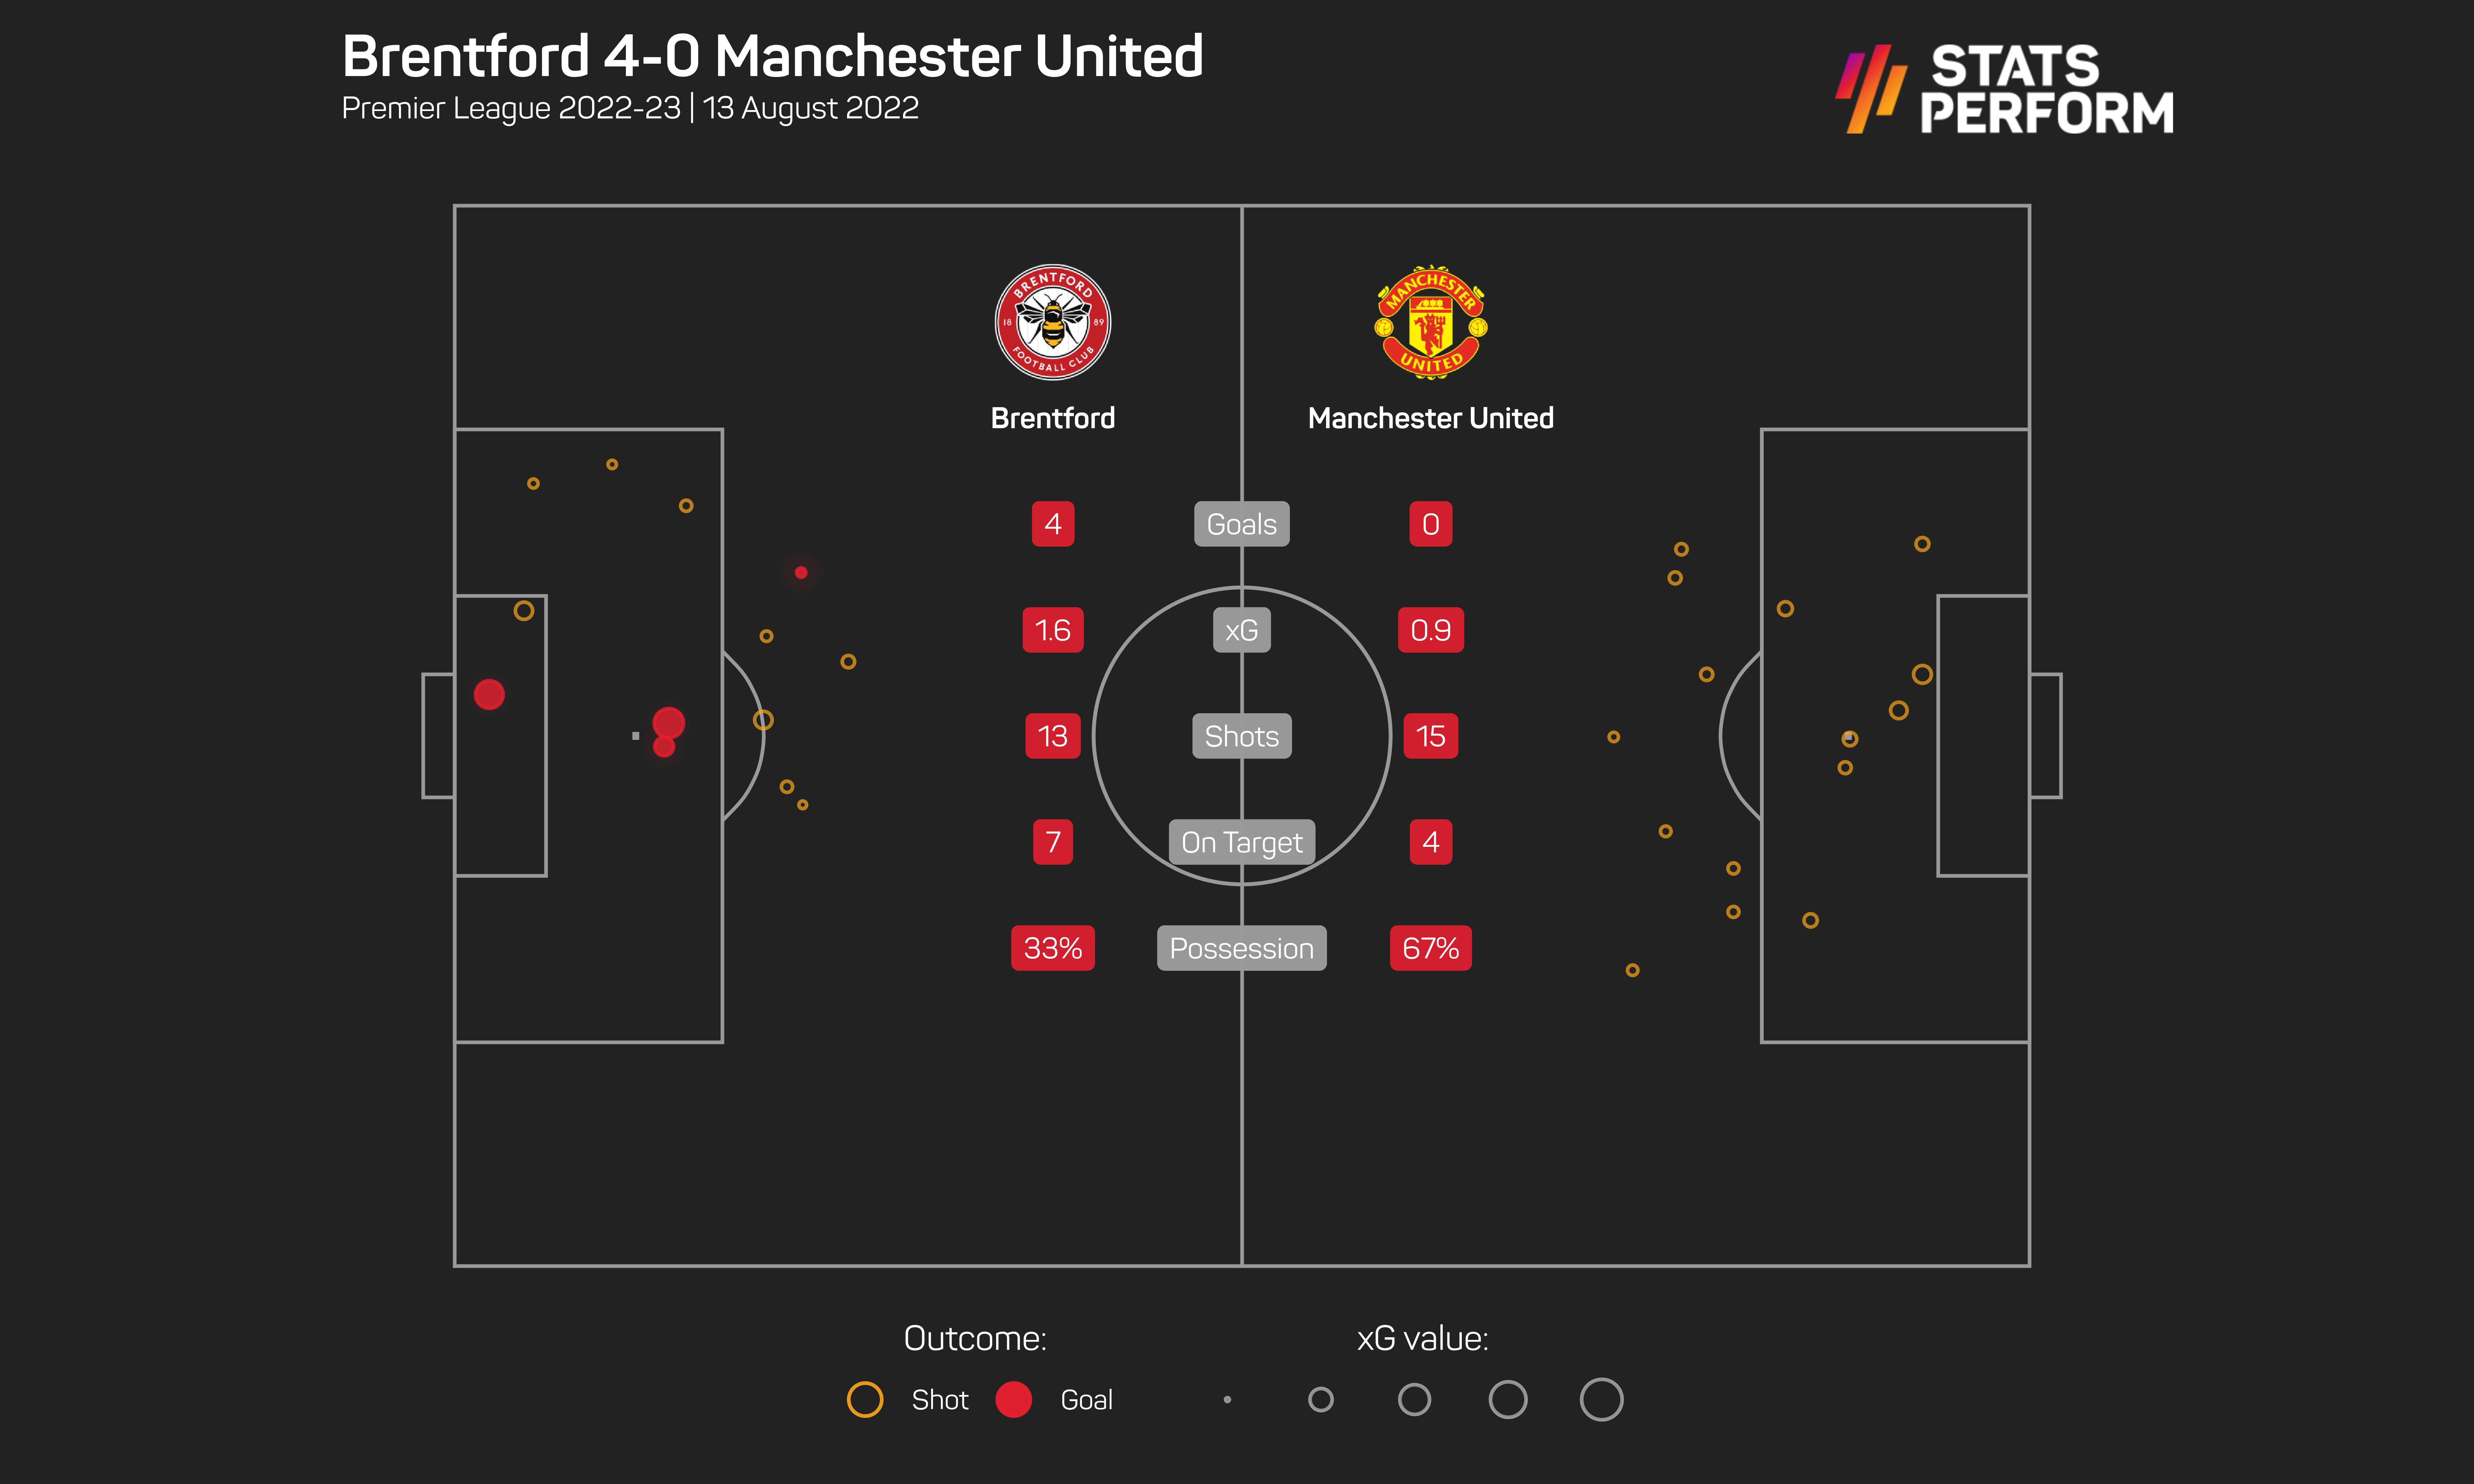 Manchester United were humiliated by Brentford